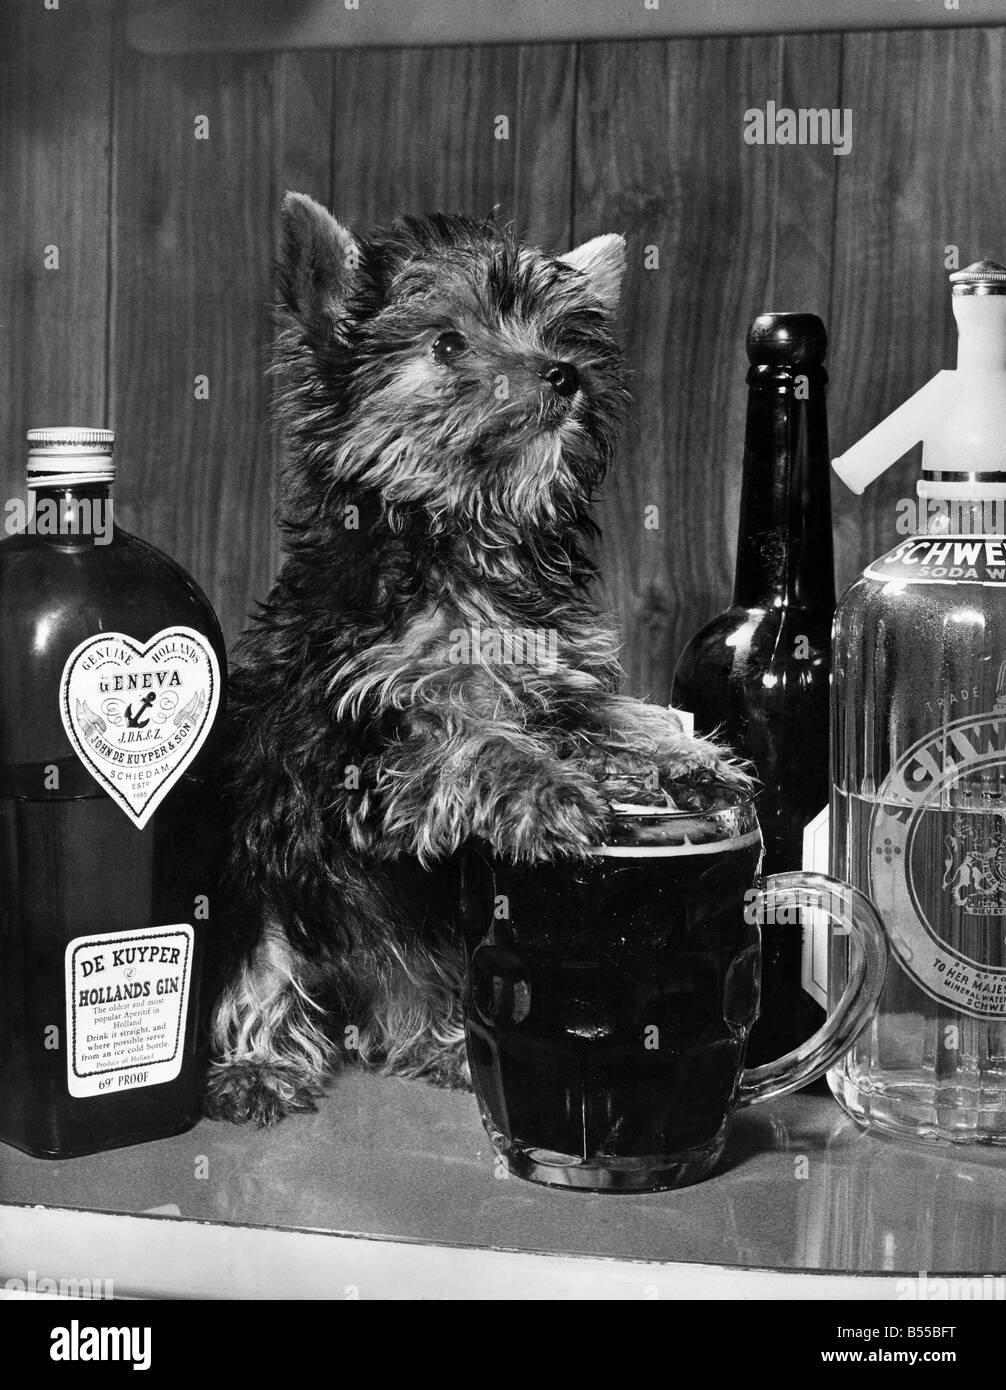 Penny the pint size pooch is a minature Yorkshire Terrier with a pint sized thirst she likes to share a pint a mild with her owner Mr Harold Hervey, of The Ridgeway Fleetwood Lanos she always goes with him tucked inside his coat in the winer weather. Penny is about 7 inches long, 4 inches high.. and was the smallest of a litter of three she is 4 months old. January 1962 P012674 Stock Photo